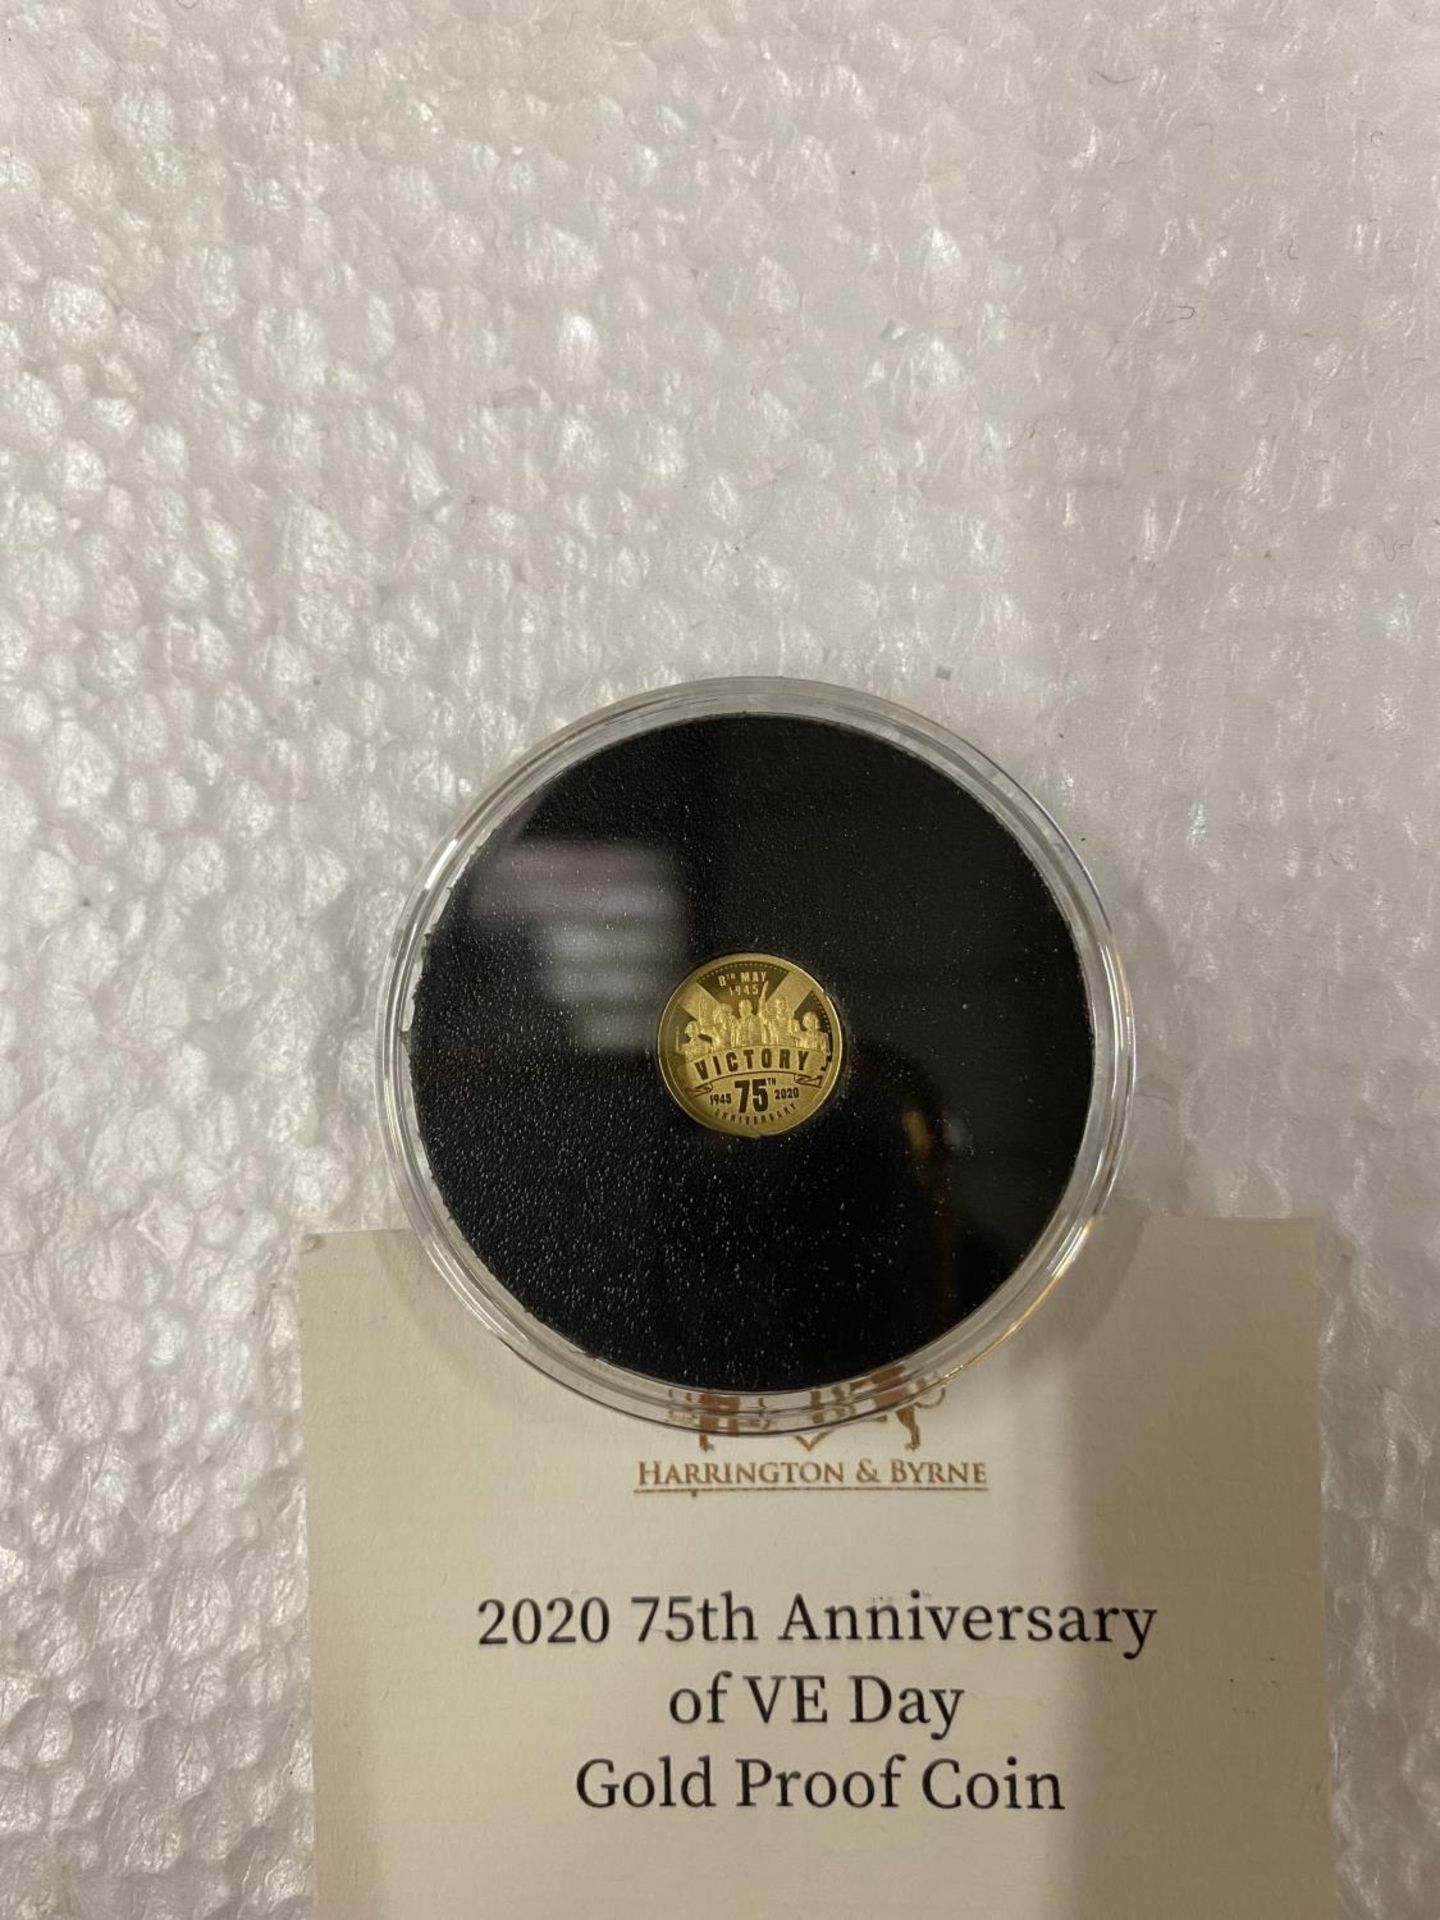 SOLOMON ISLANDS “2020 75TH ANNIVERSARY OF VE DAY” 24 CARAT GOLD PROOF COIN WITH COA . THE COIN - Image 3 of 3